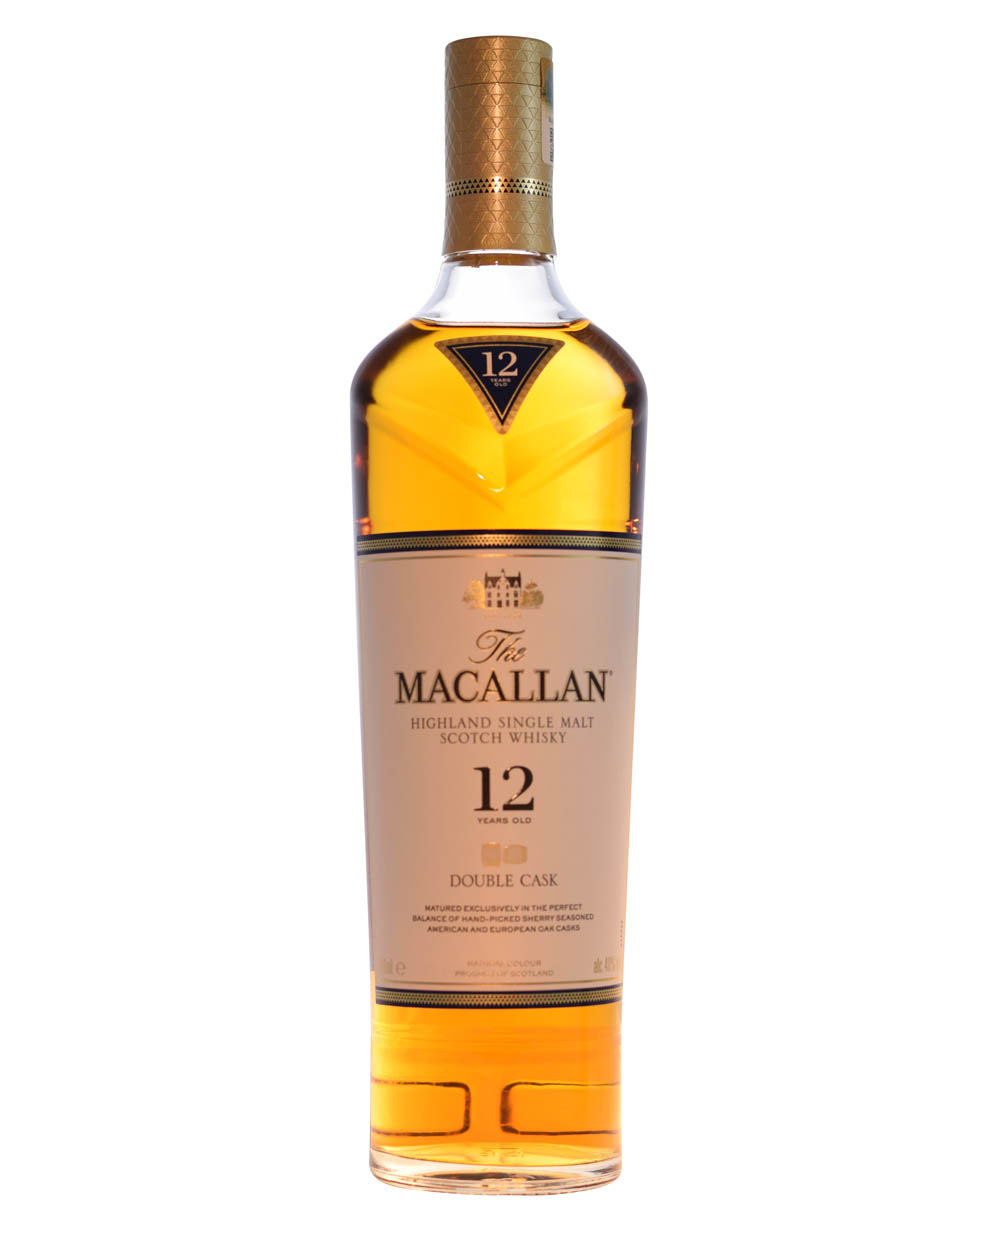 Macallan Double Cask (12 Years Old) Musthave Malts MHM